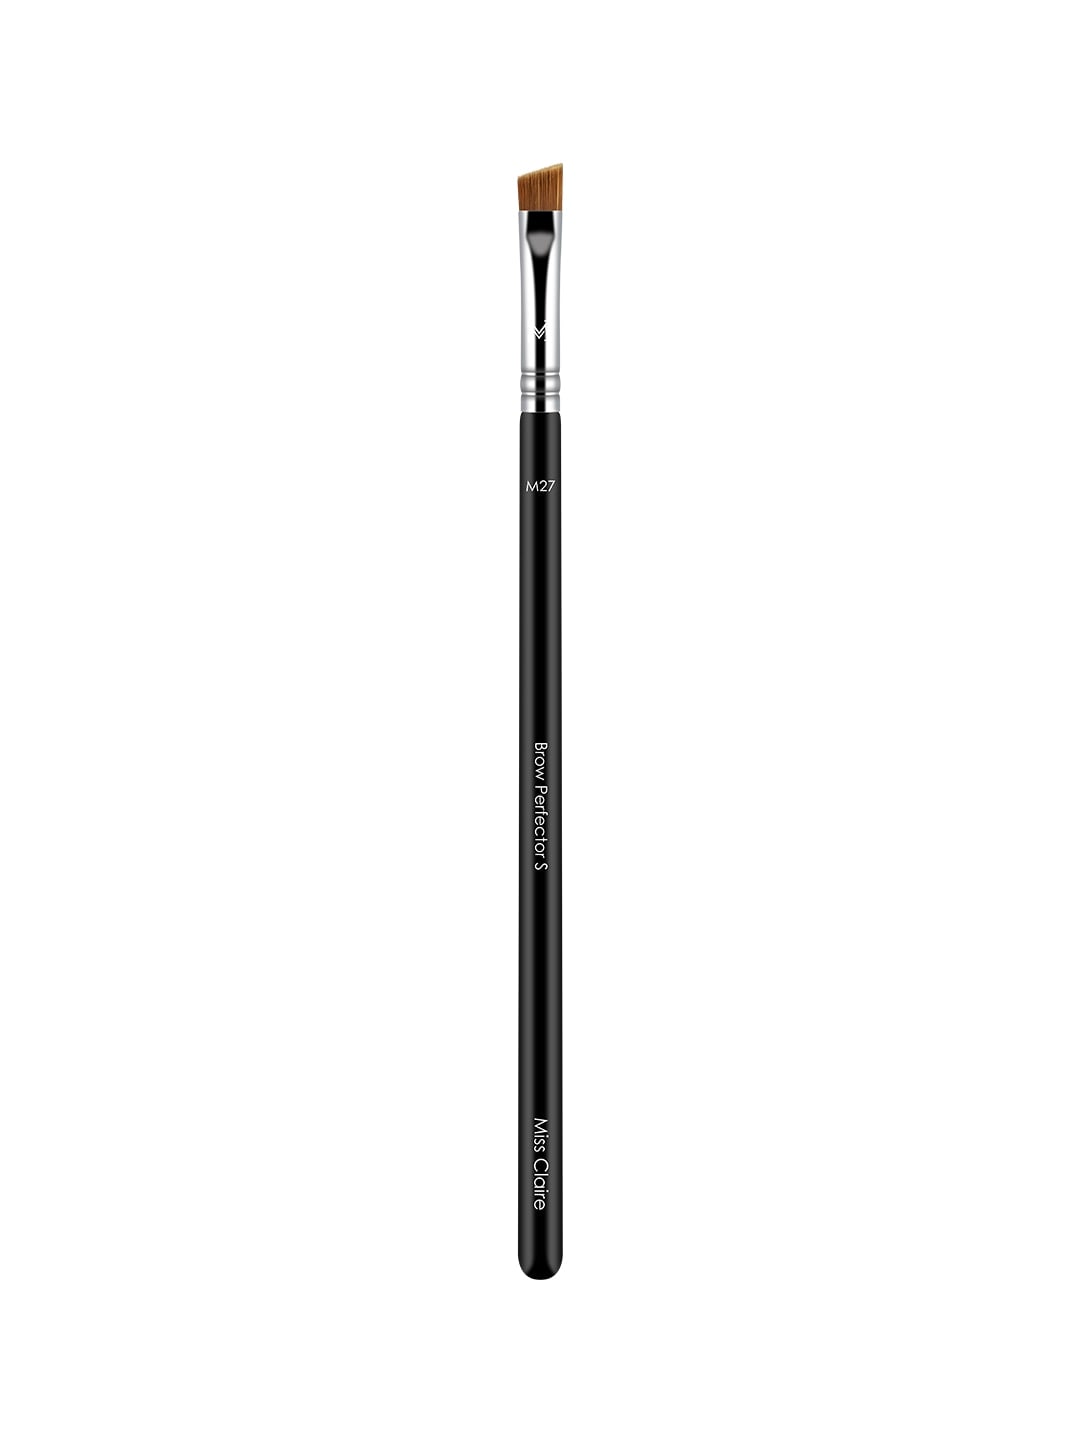 Miss Claire M27 - Brow Perfector Brush (S) - Silver-Toned & Black Price in India